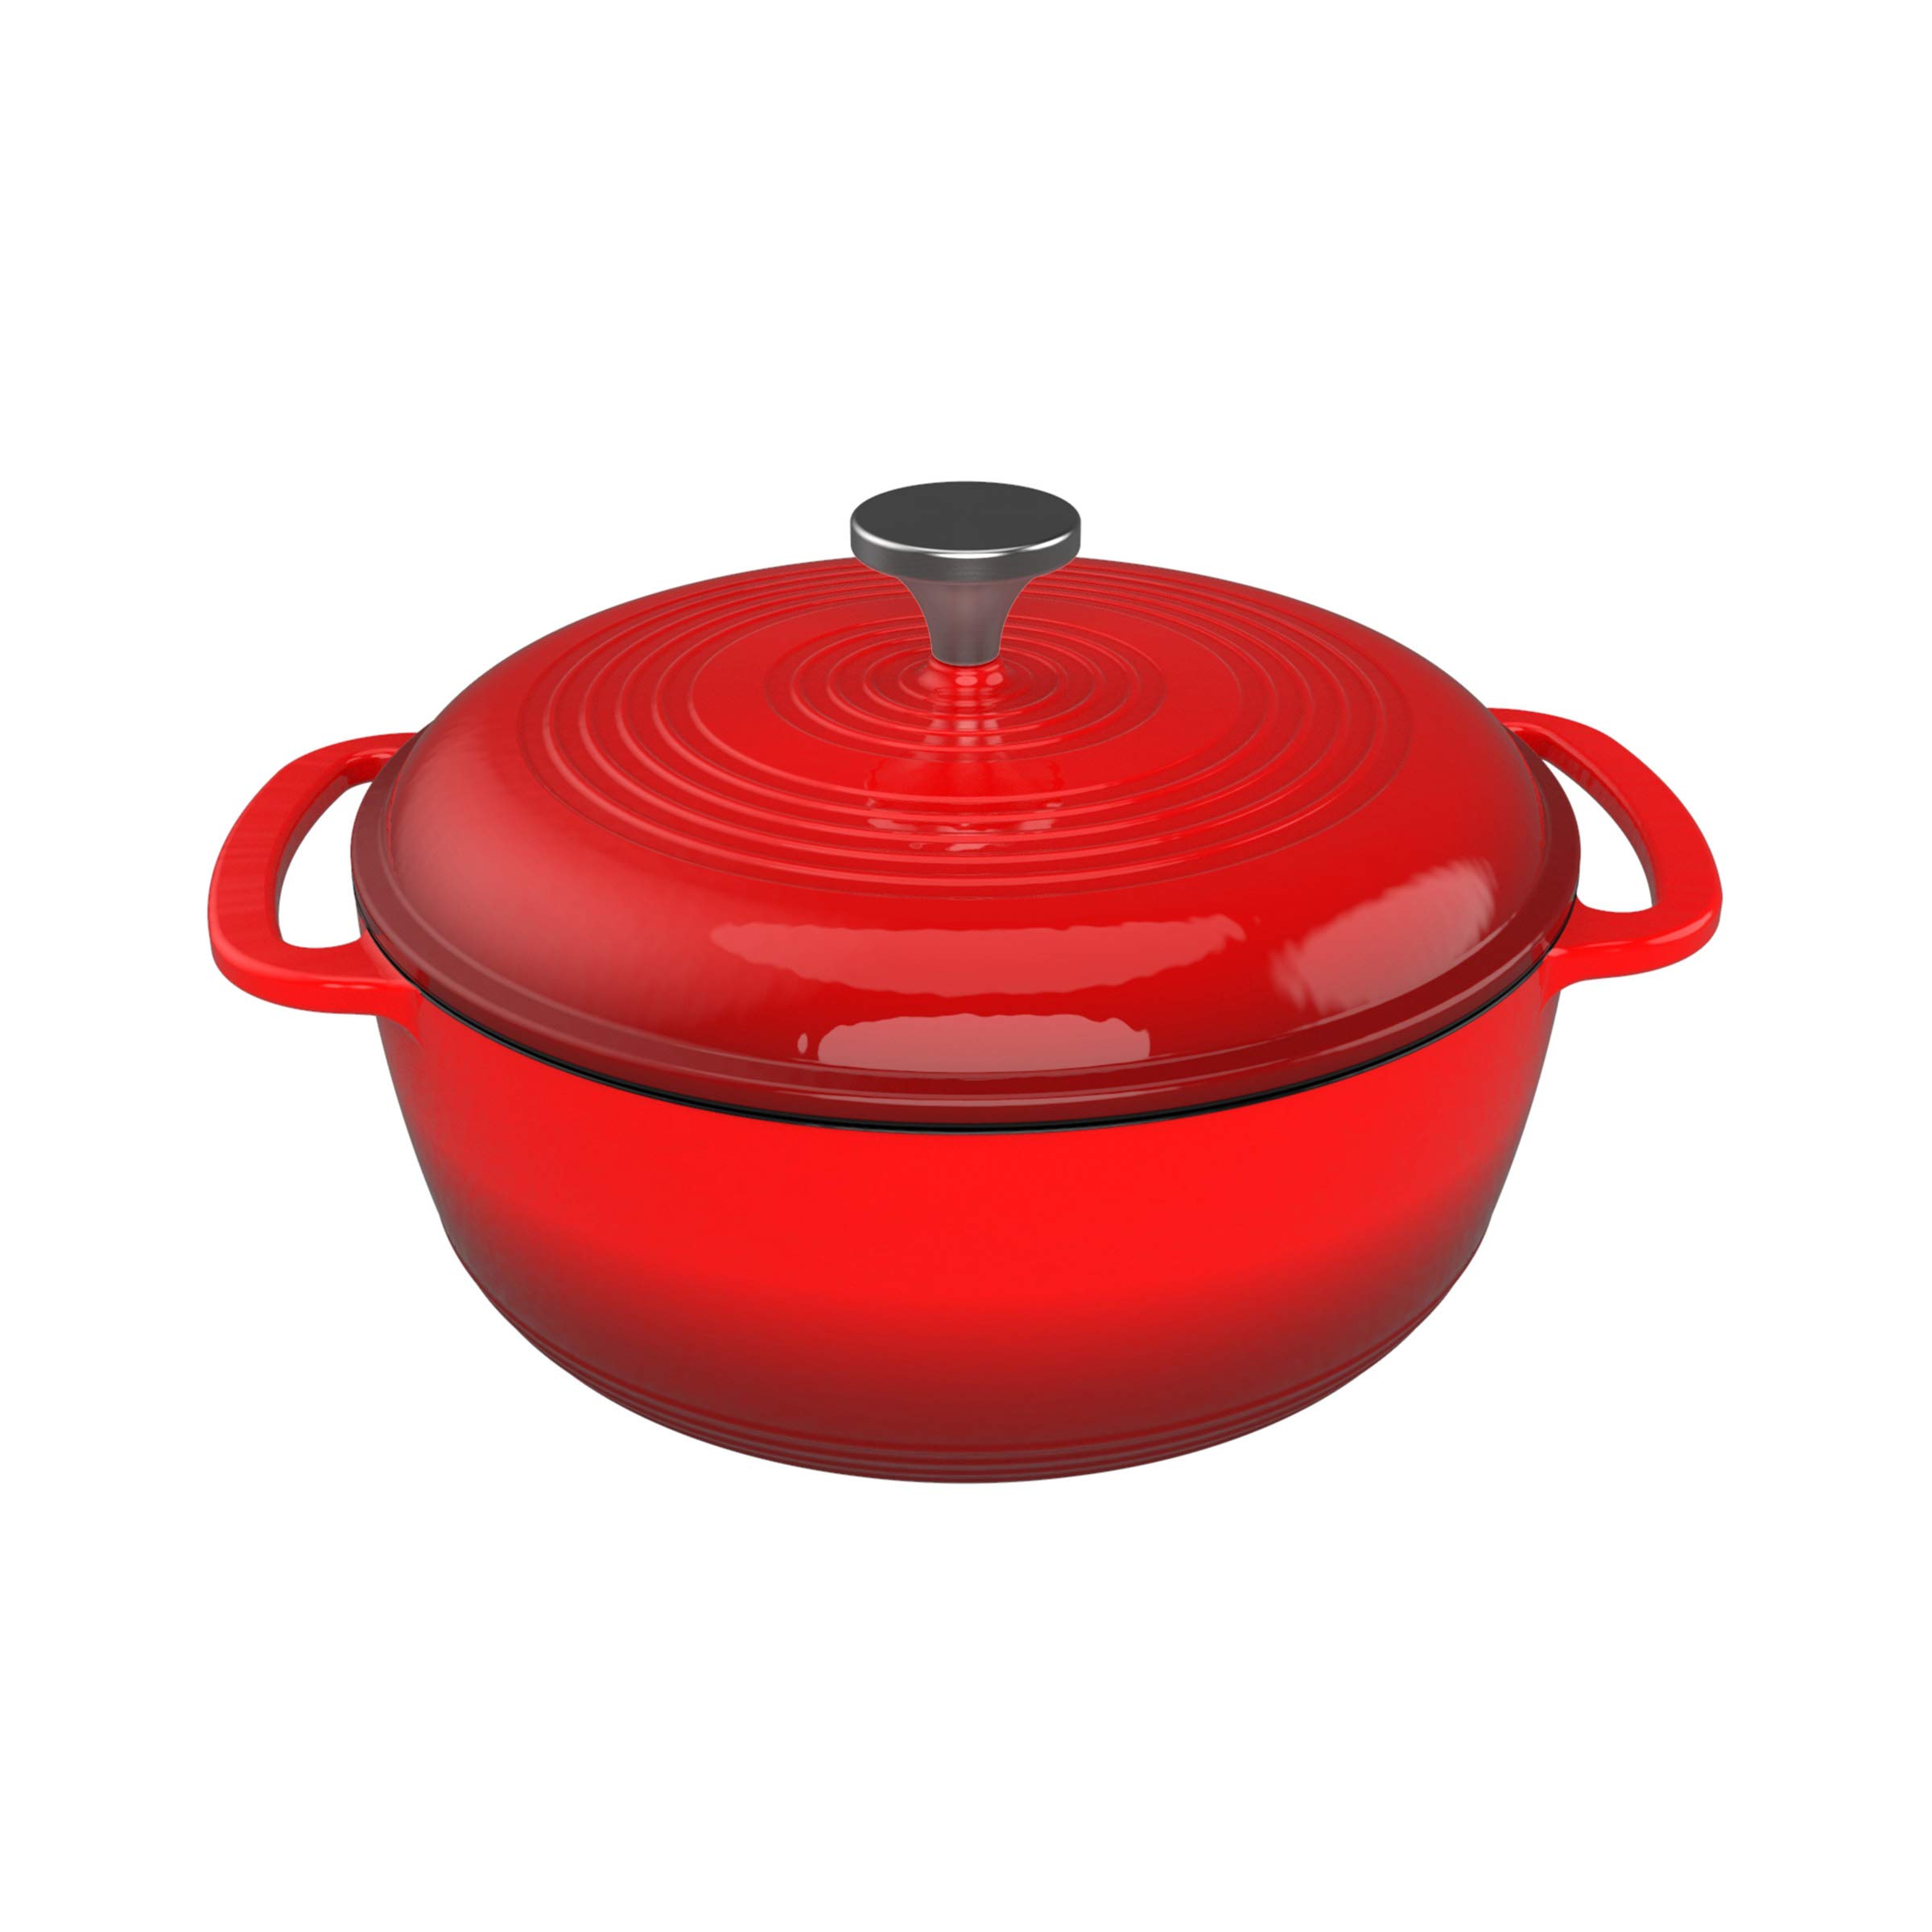 Classic Cuisine Cast Iron Dutch Lid 3 Quart Enamel Coated Oven or Stovetop-for Soup, Chicken, Pot Roast and More-Kitchen Cookware, Red